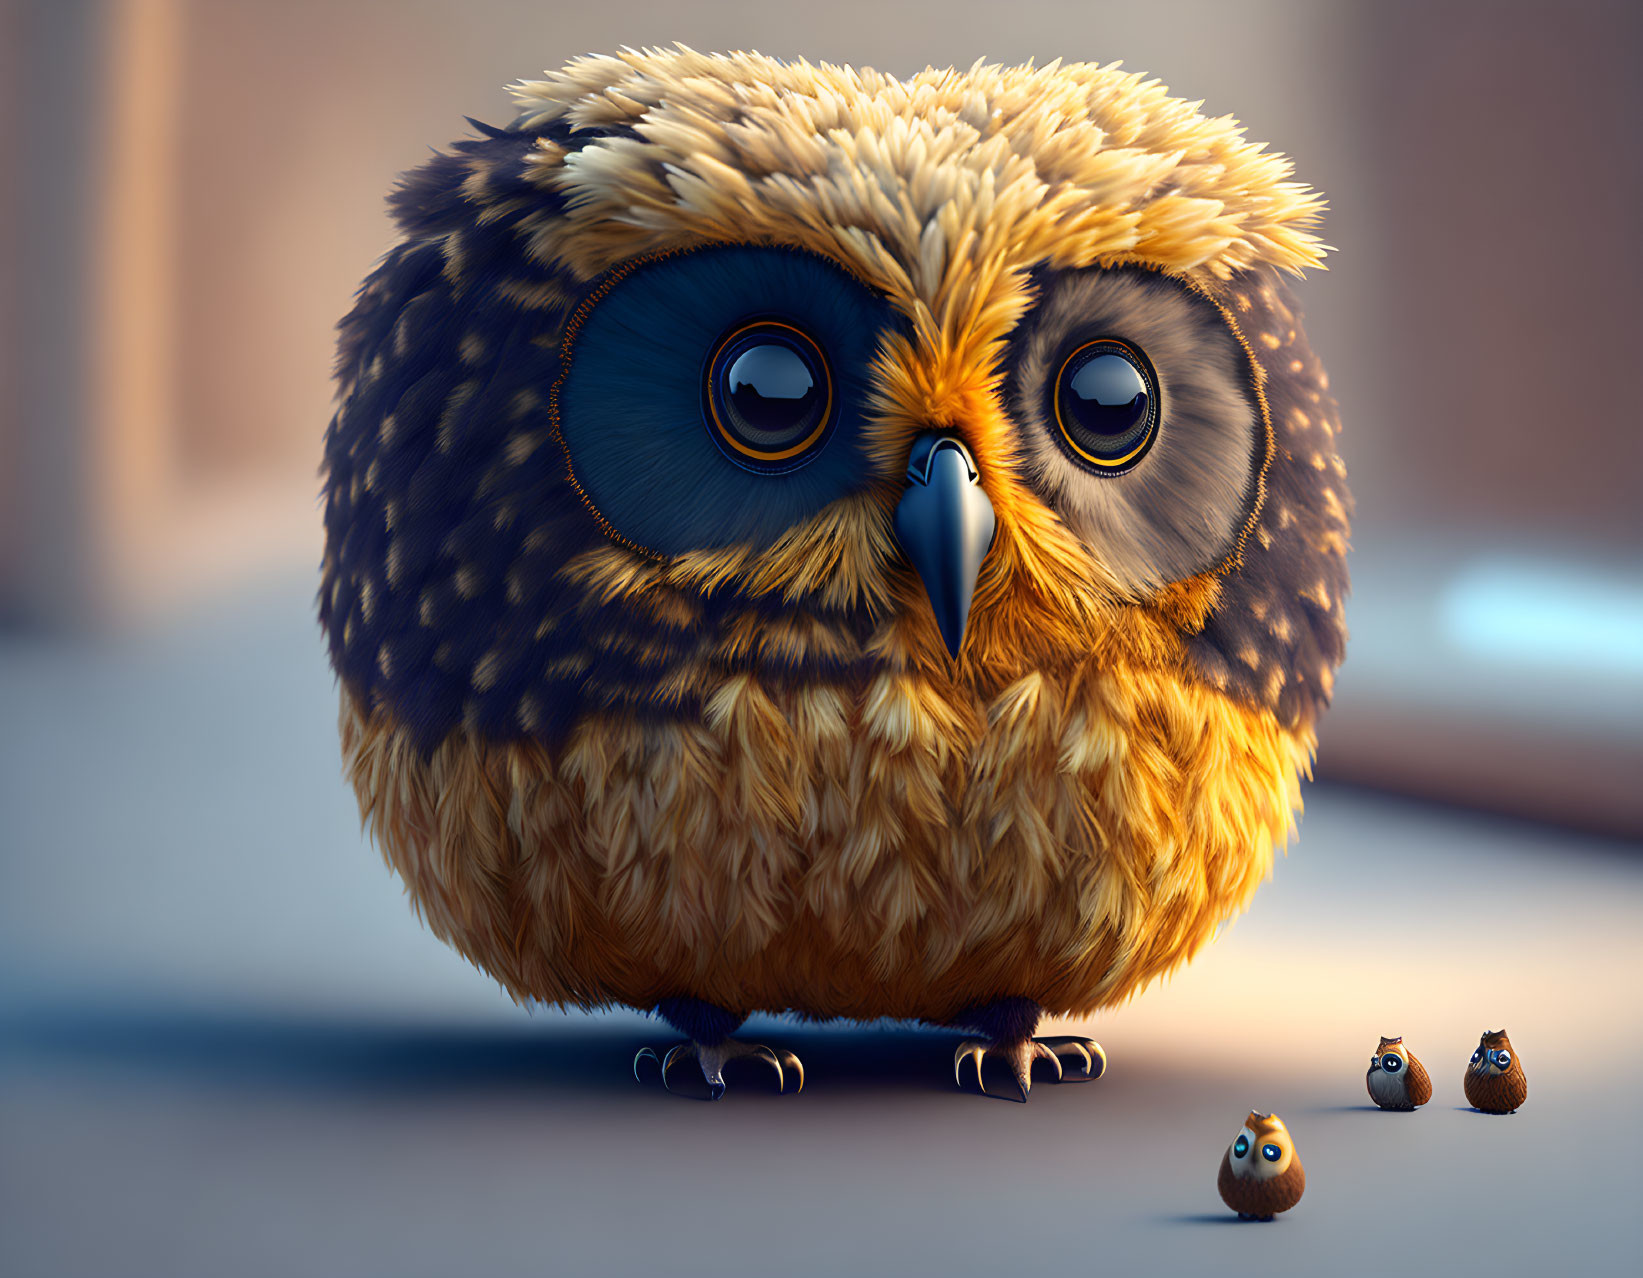 Cartoonish owl with big blue eyes and fluffy feathers beside three mini versions